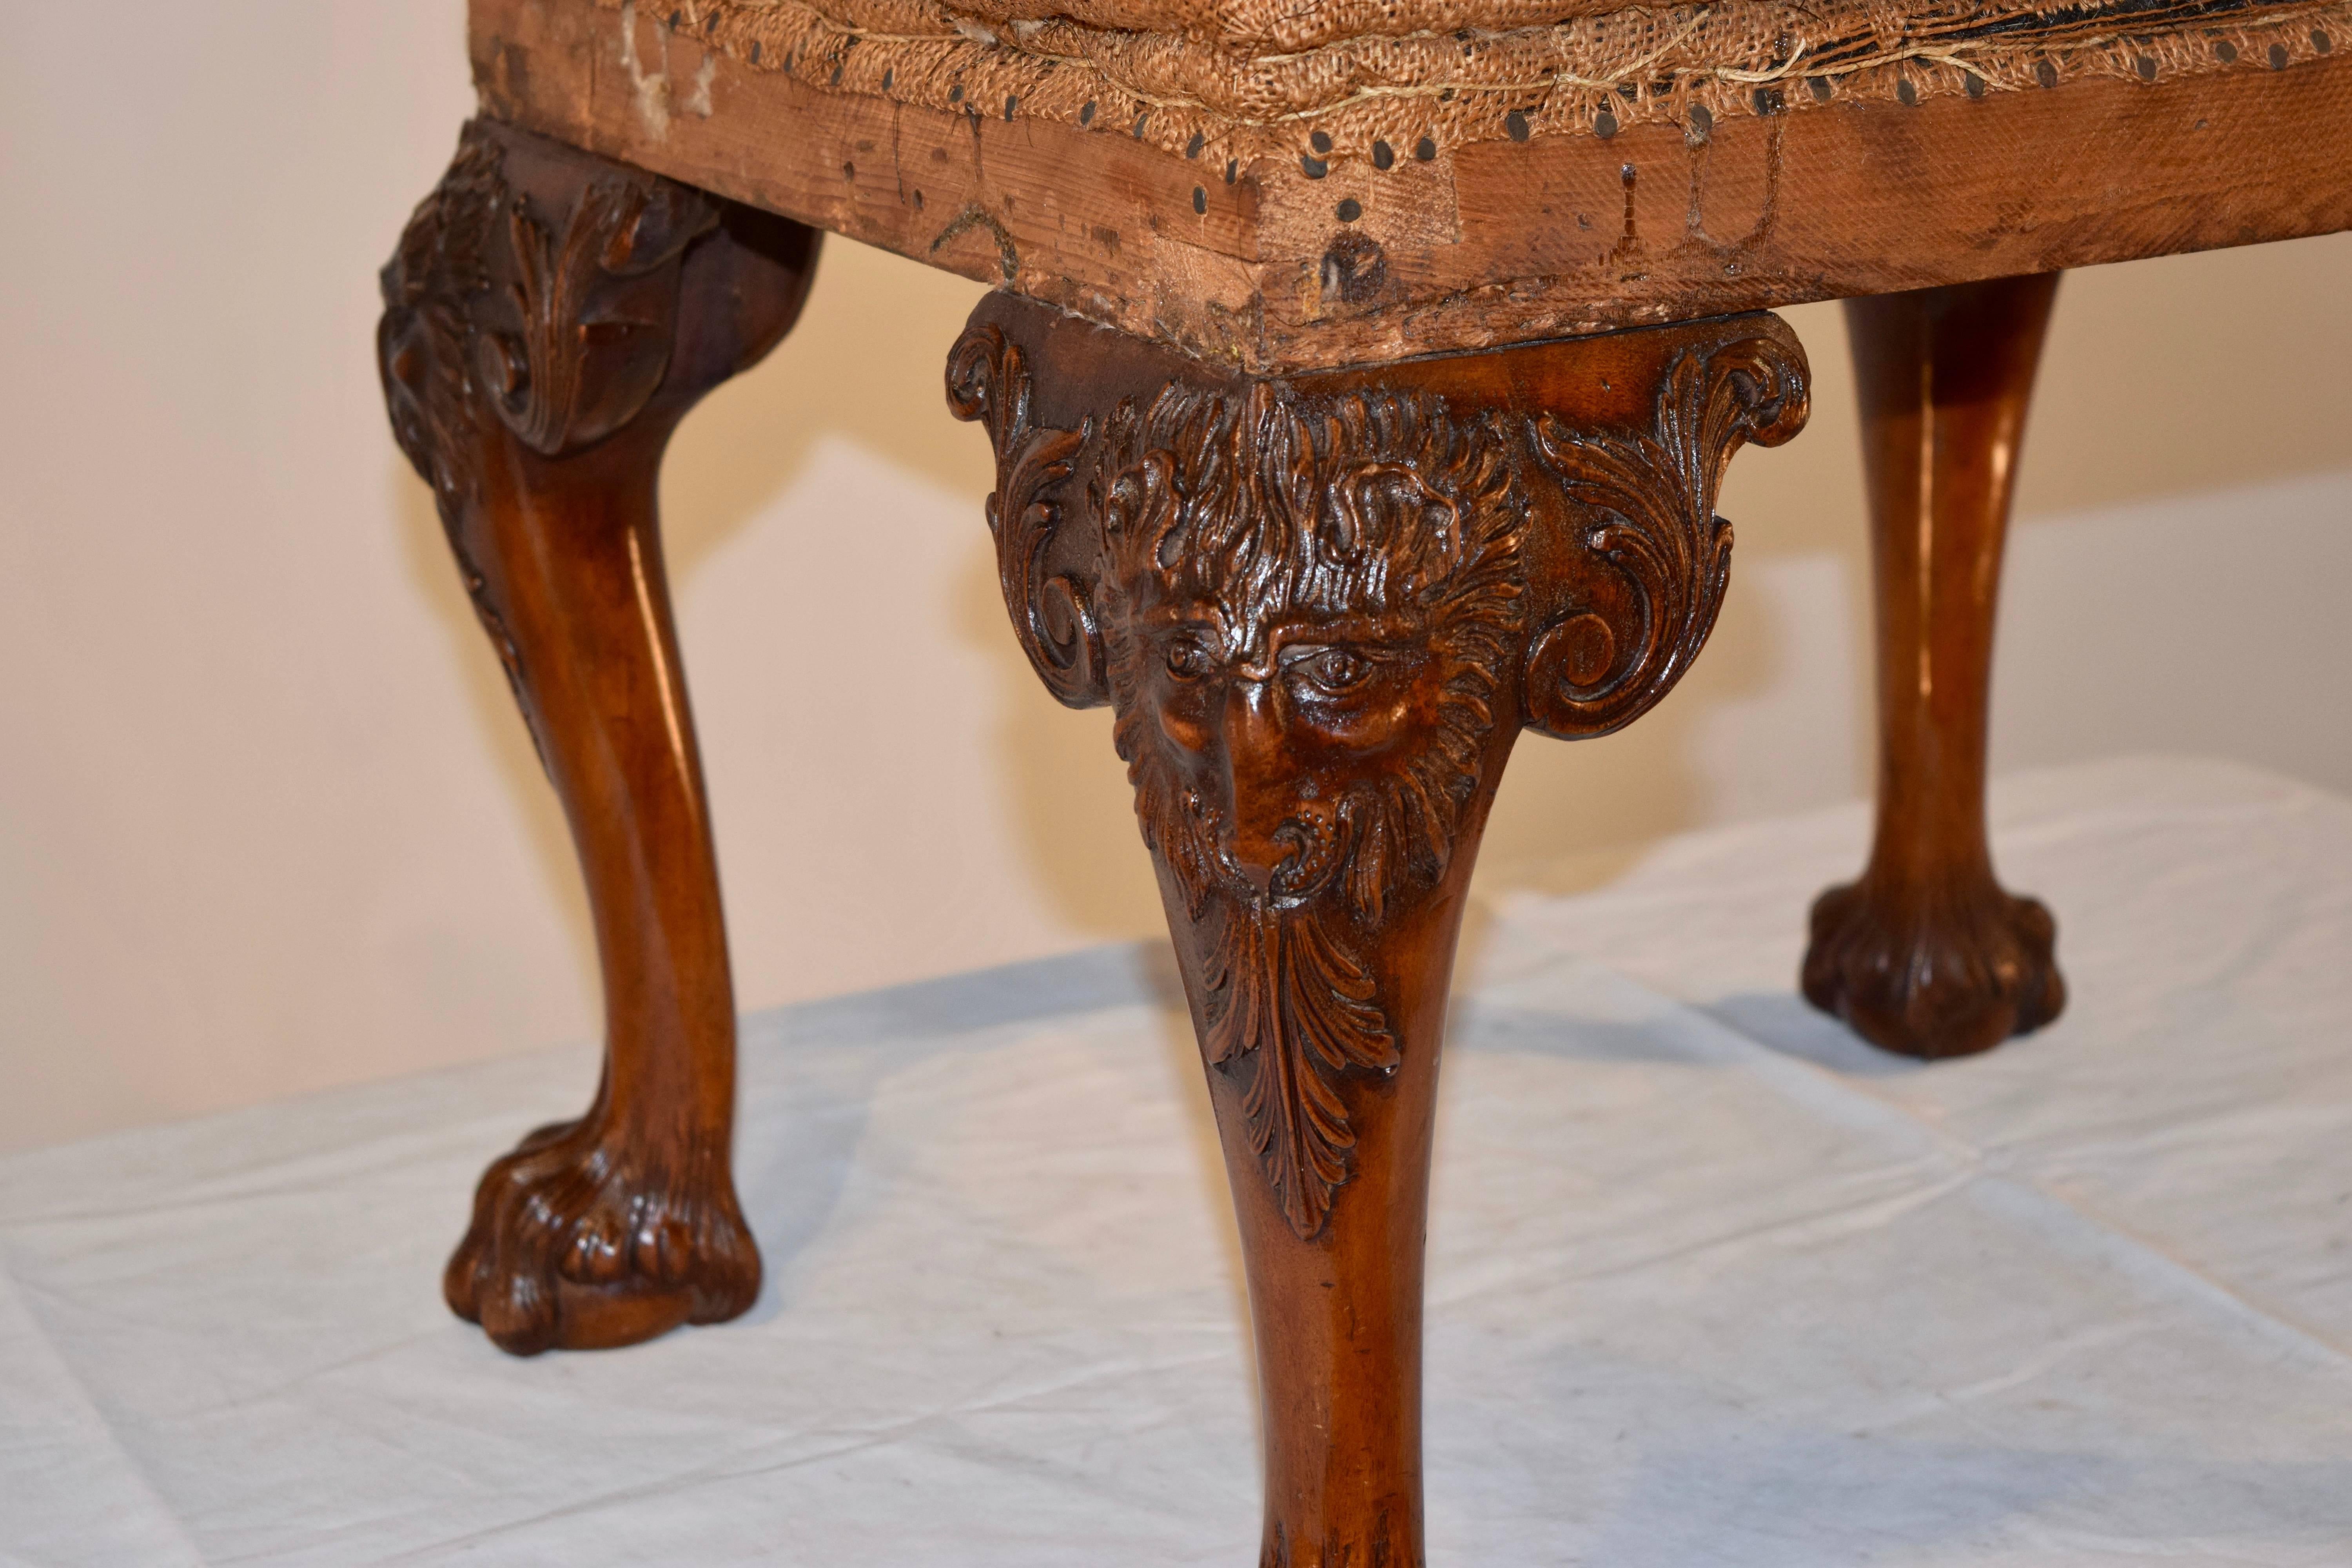 18th century mahogany stool in original condition with horse hair and burlap upholstery with webbing underneath. The frame has wonderfully cabriole legs with hand-carved rams and foliage, ending in hairy paw feet.